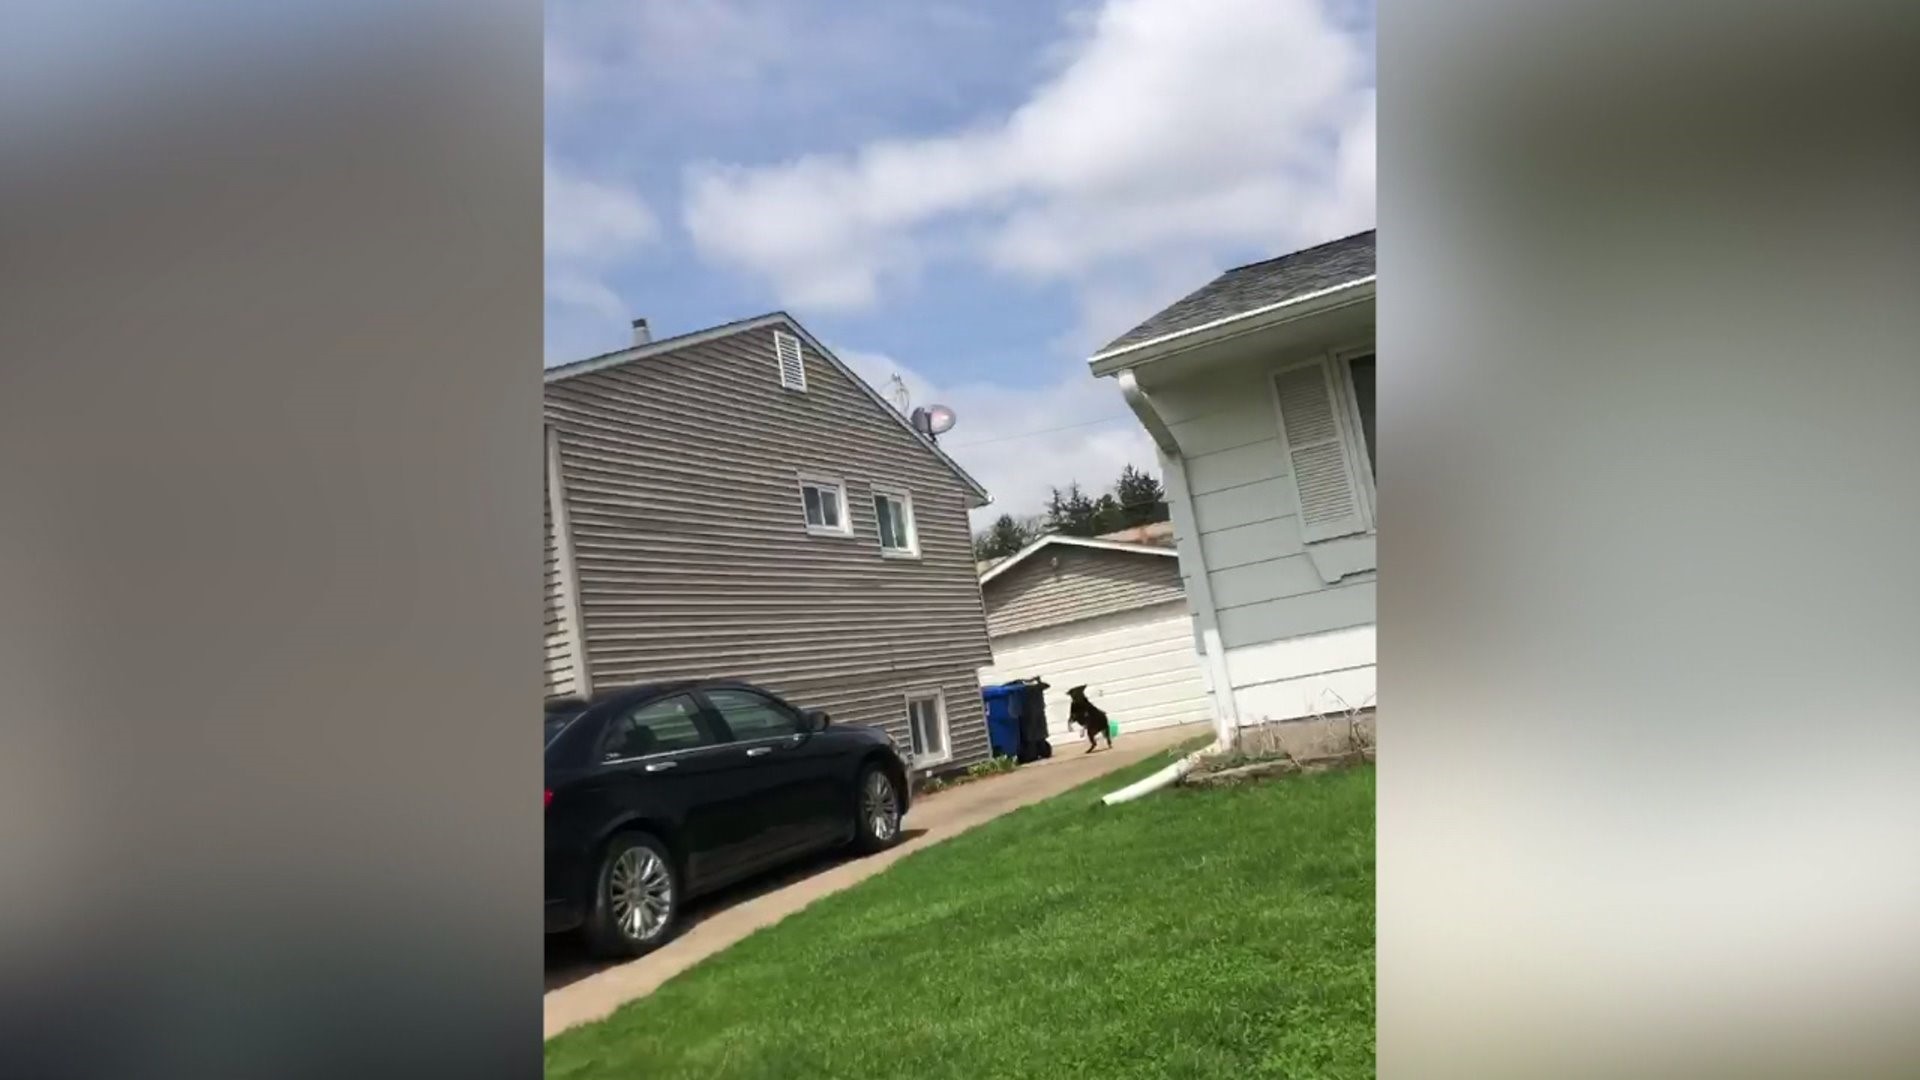 Mail delivery stopped to some Moline homes due to "behavior of specific dog"